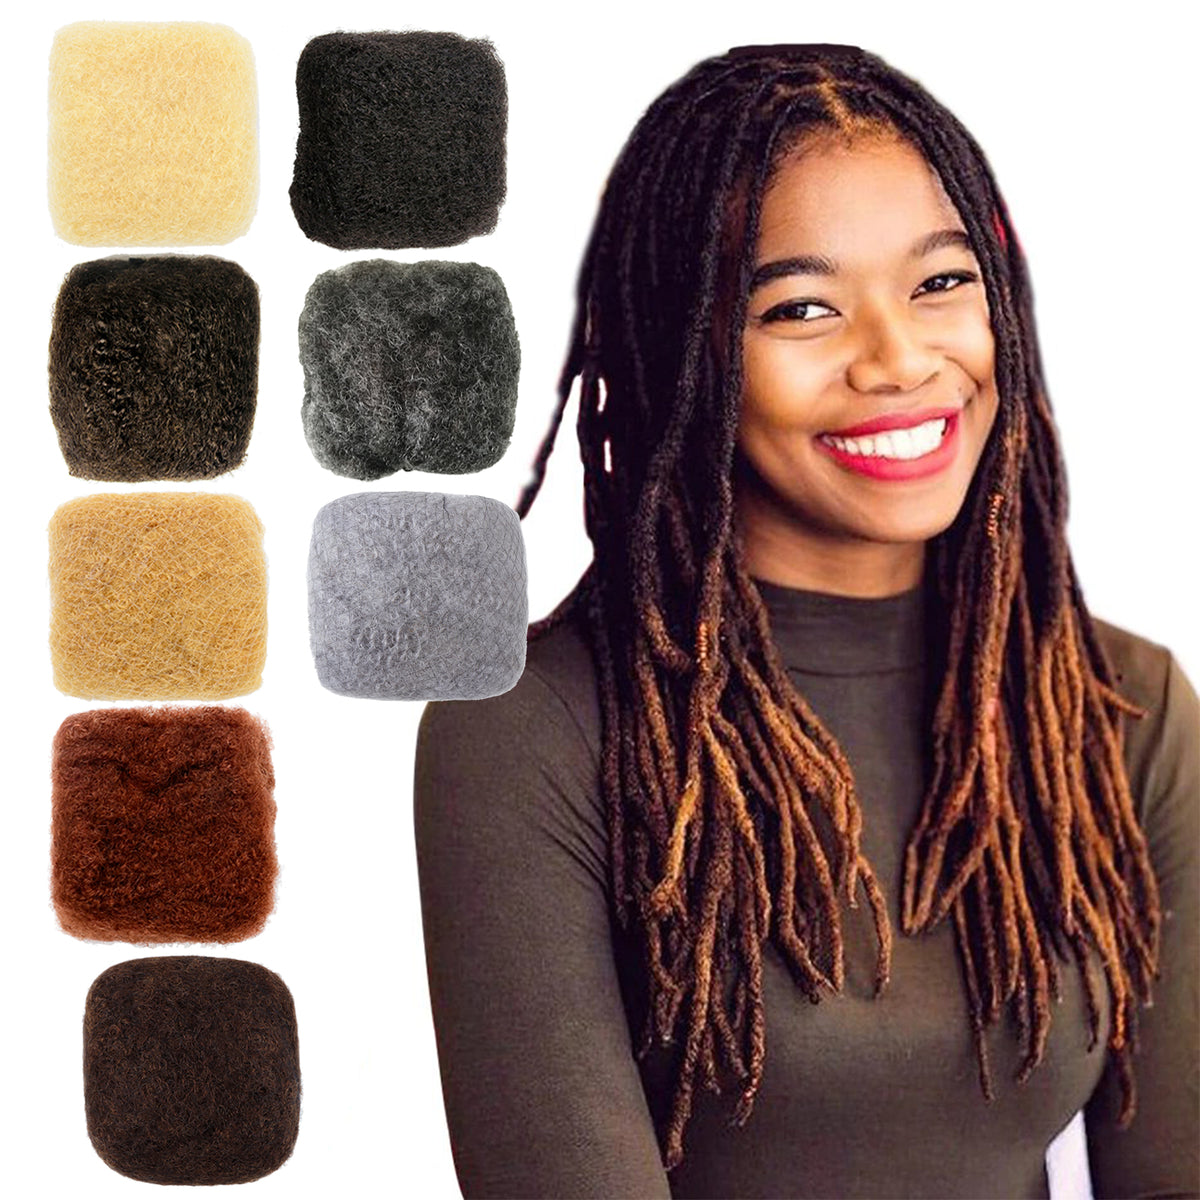 Afro Kinky Human Hairs For Making,Repairing & Bulking Locs 8 Inch Long Afro Kinky Bulk Human Hair For Dreadlock Extensions 100% Natural Afro Hairs For Twisting & Braiding 29g/1Oz (#4 / Brown, 8 Inch)